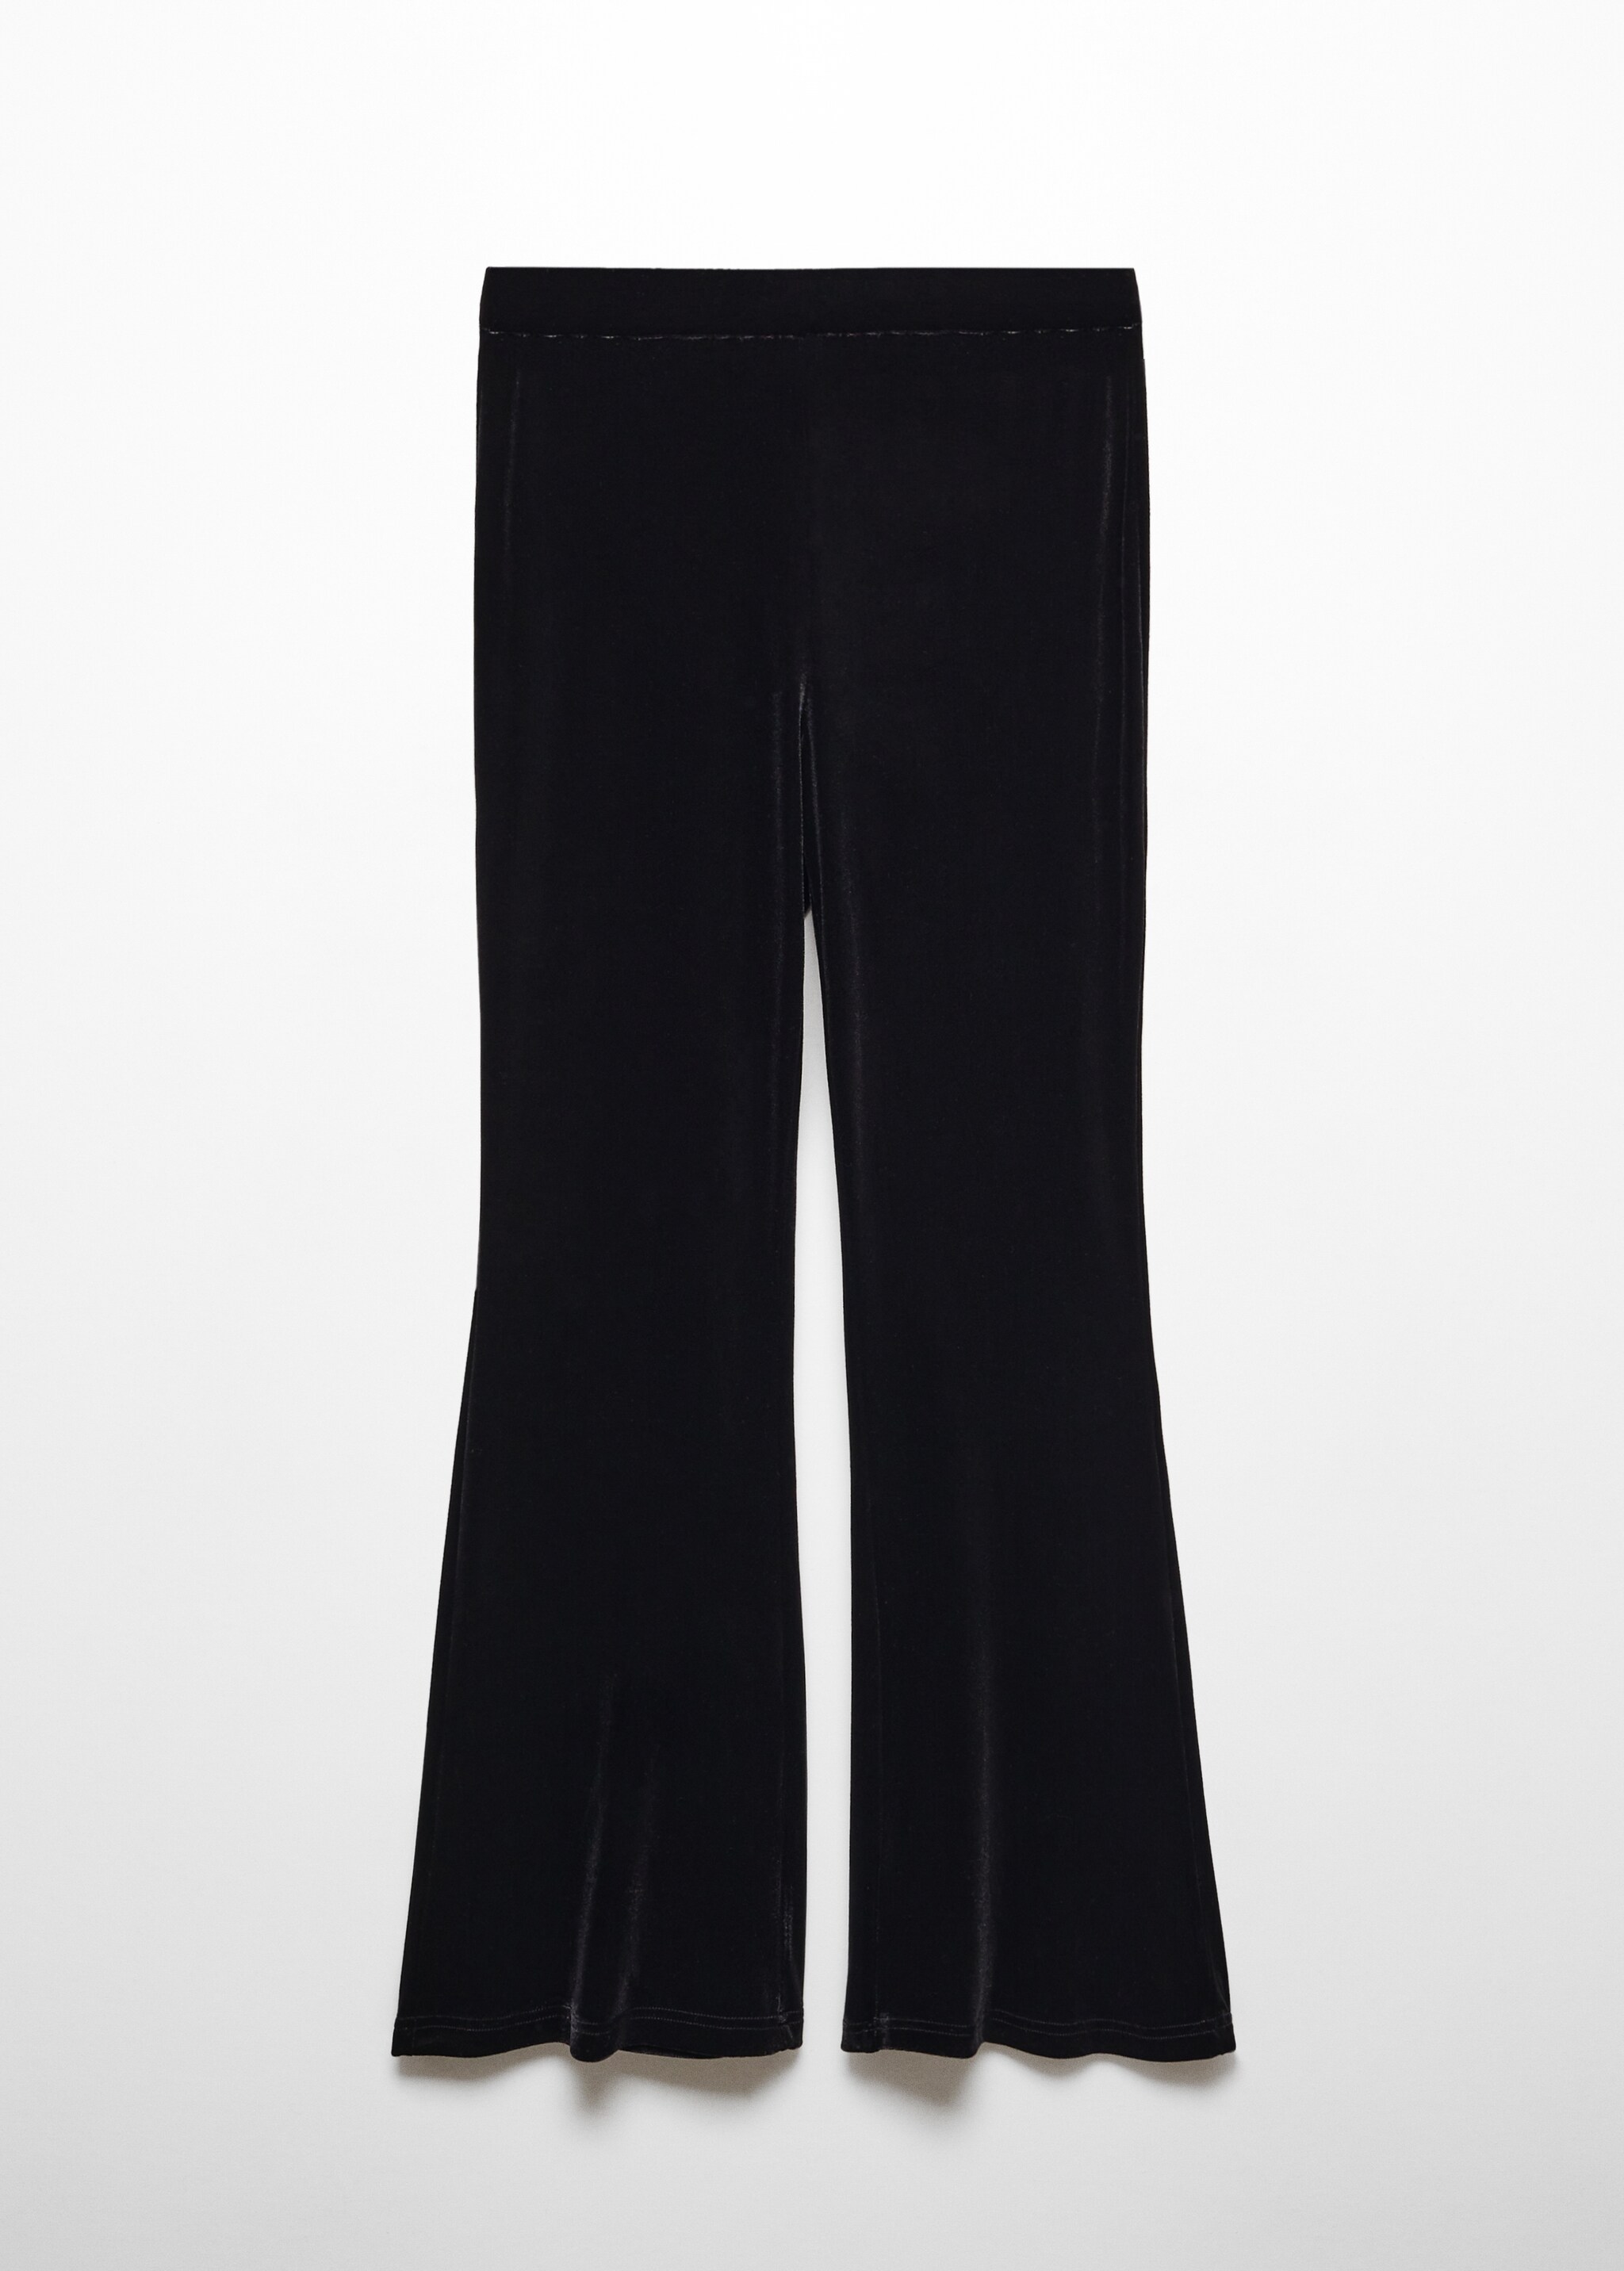 Straight velvet trousers - Article without model